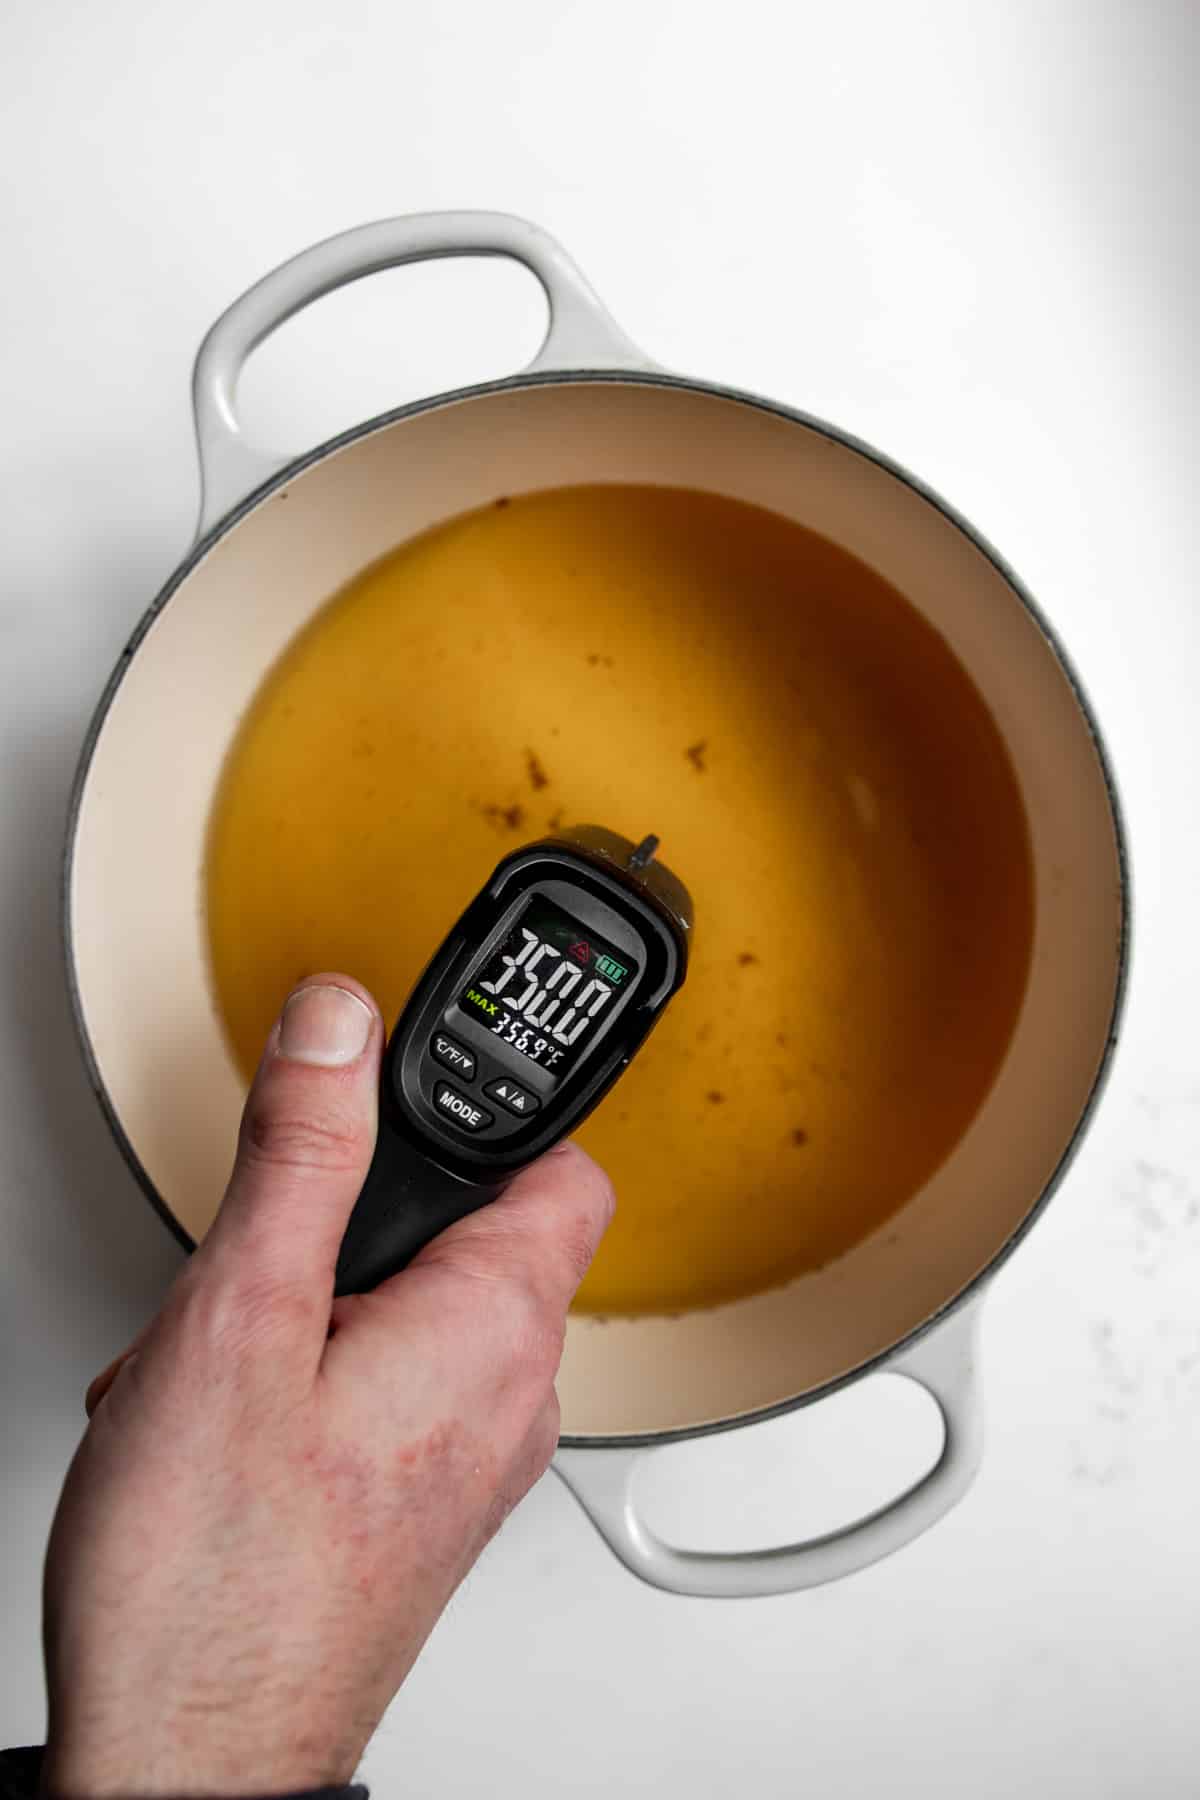 Hand holding laser thermometer reading 350°F over oil.